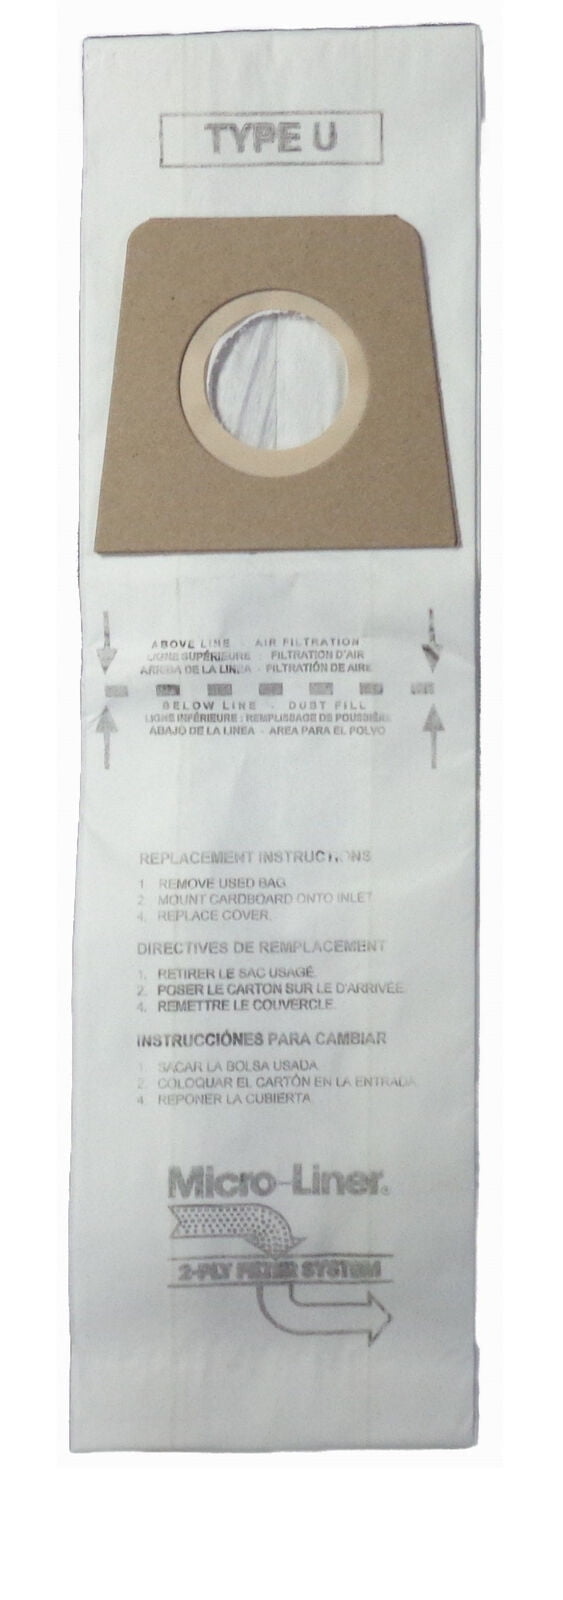 DVC [9 Bags] Royal Dirt Devil Type U Micro Allergen Vacuum Cleaner Bags by DVC Made in USA